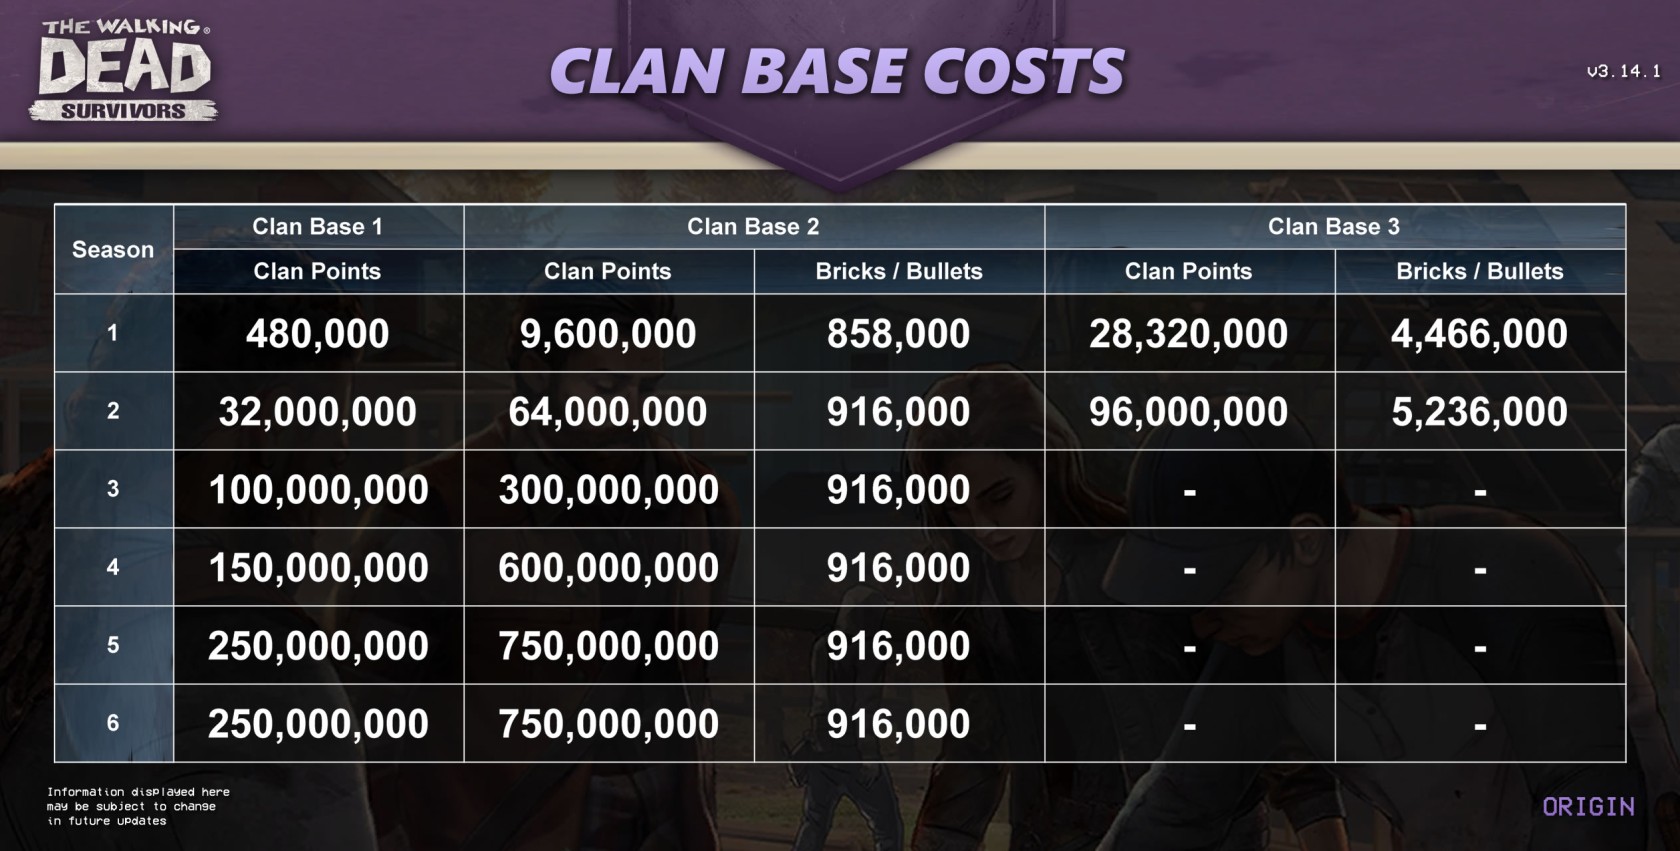 ClanBaseCosts.jpg